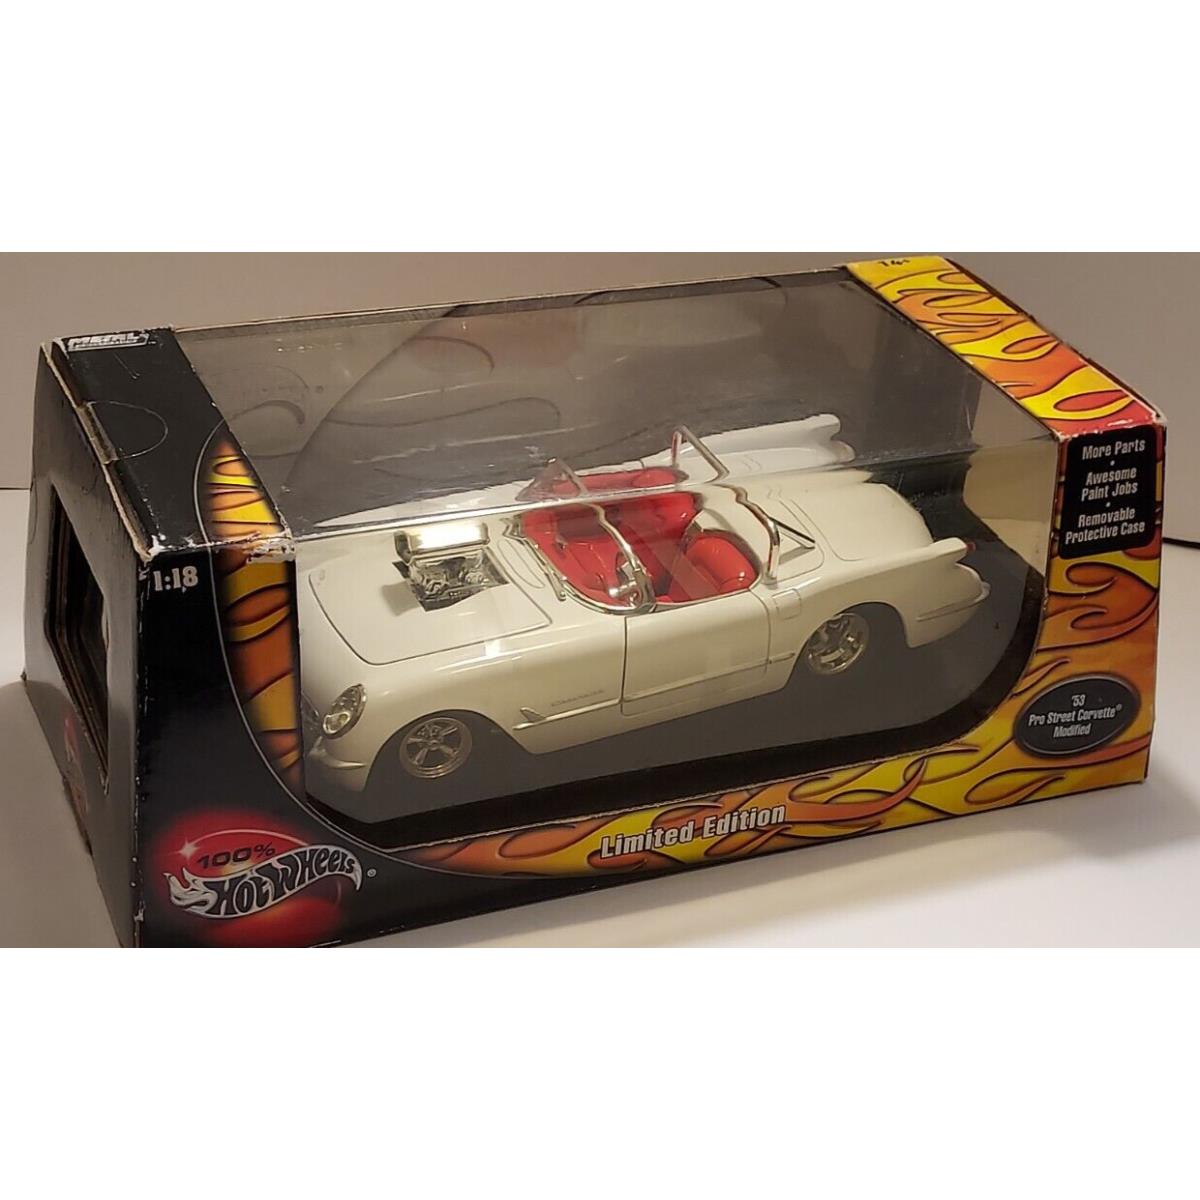 Hot Wheels Corvette 1953 Pro Street Modified Limited Edition 1:18 Scale